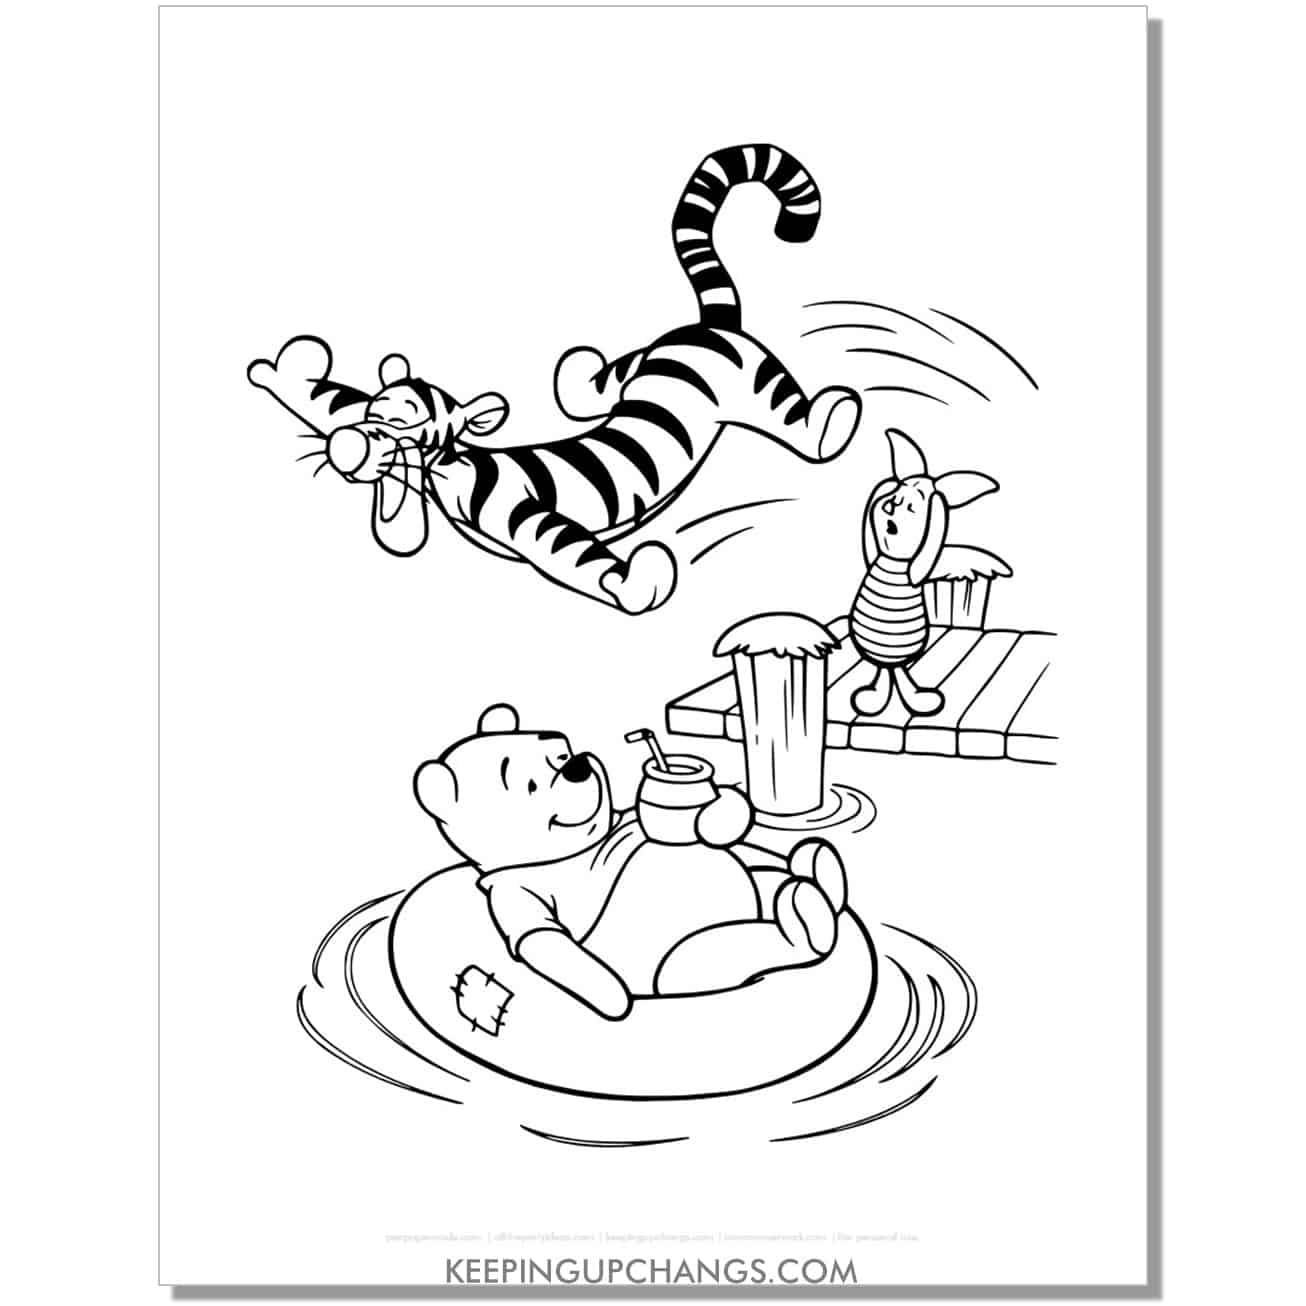 tigger jumps into water with pooh bear on floatie and piglet on dock coloring page, sheet.